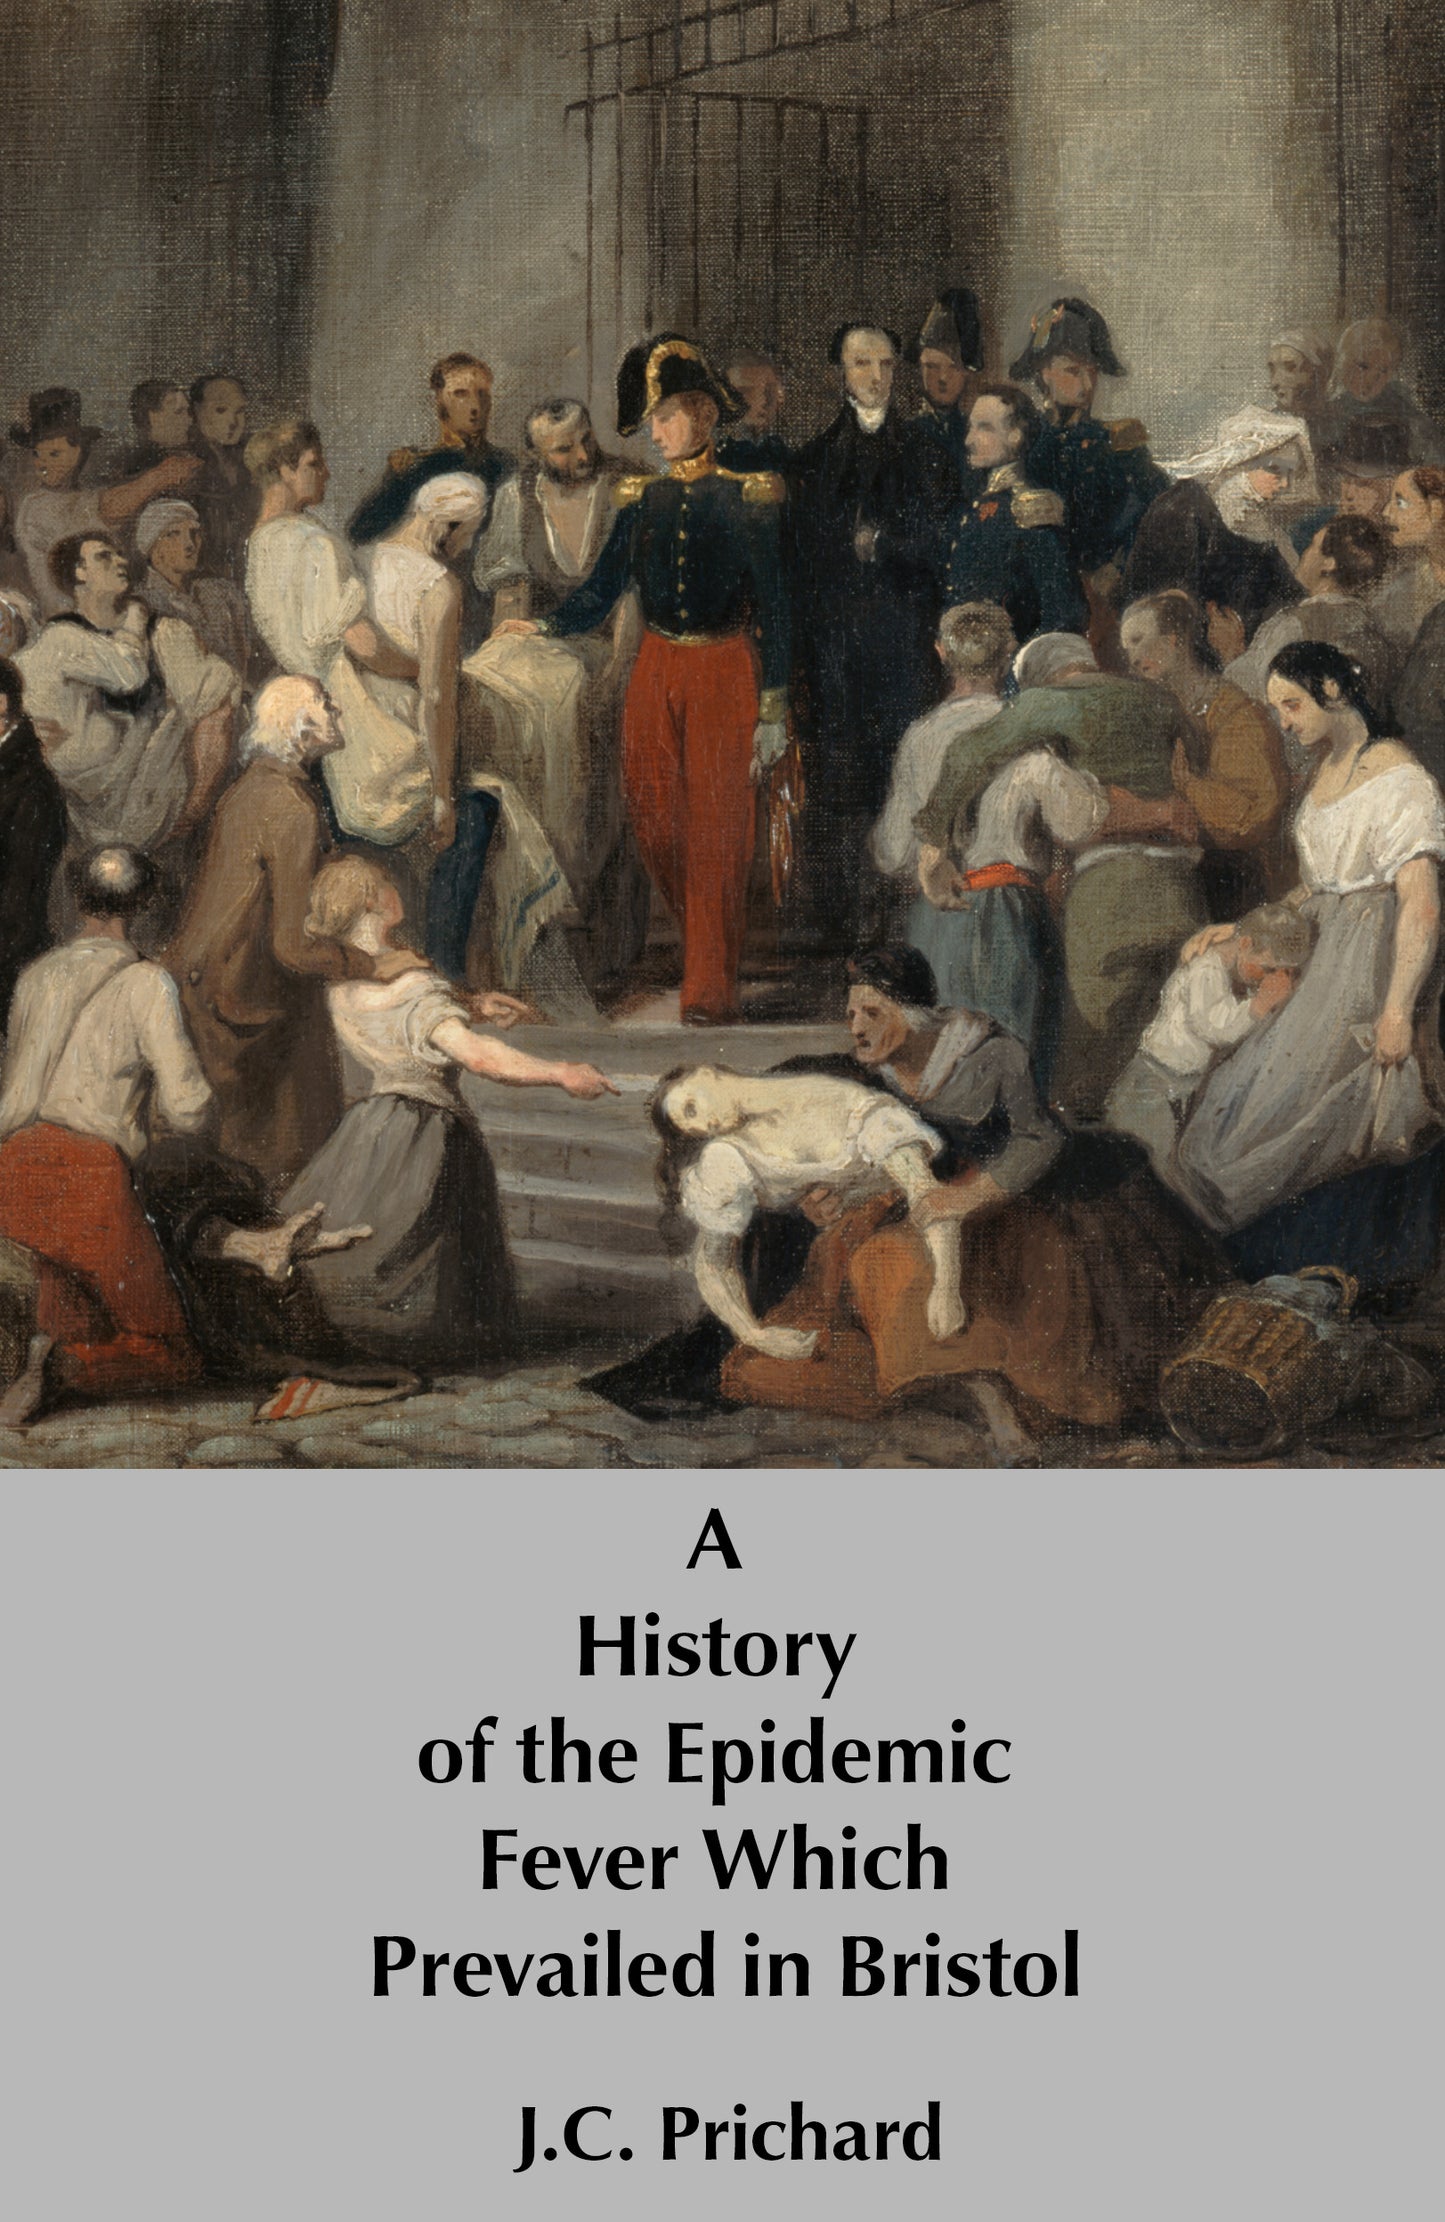 A History of the Epidemic Fever Which Prevailed in Bristol